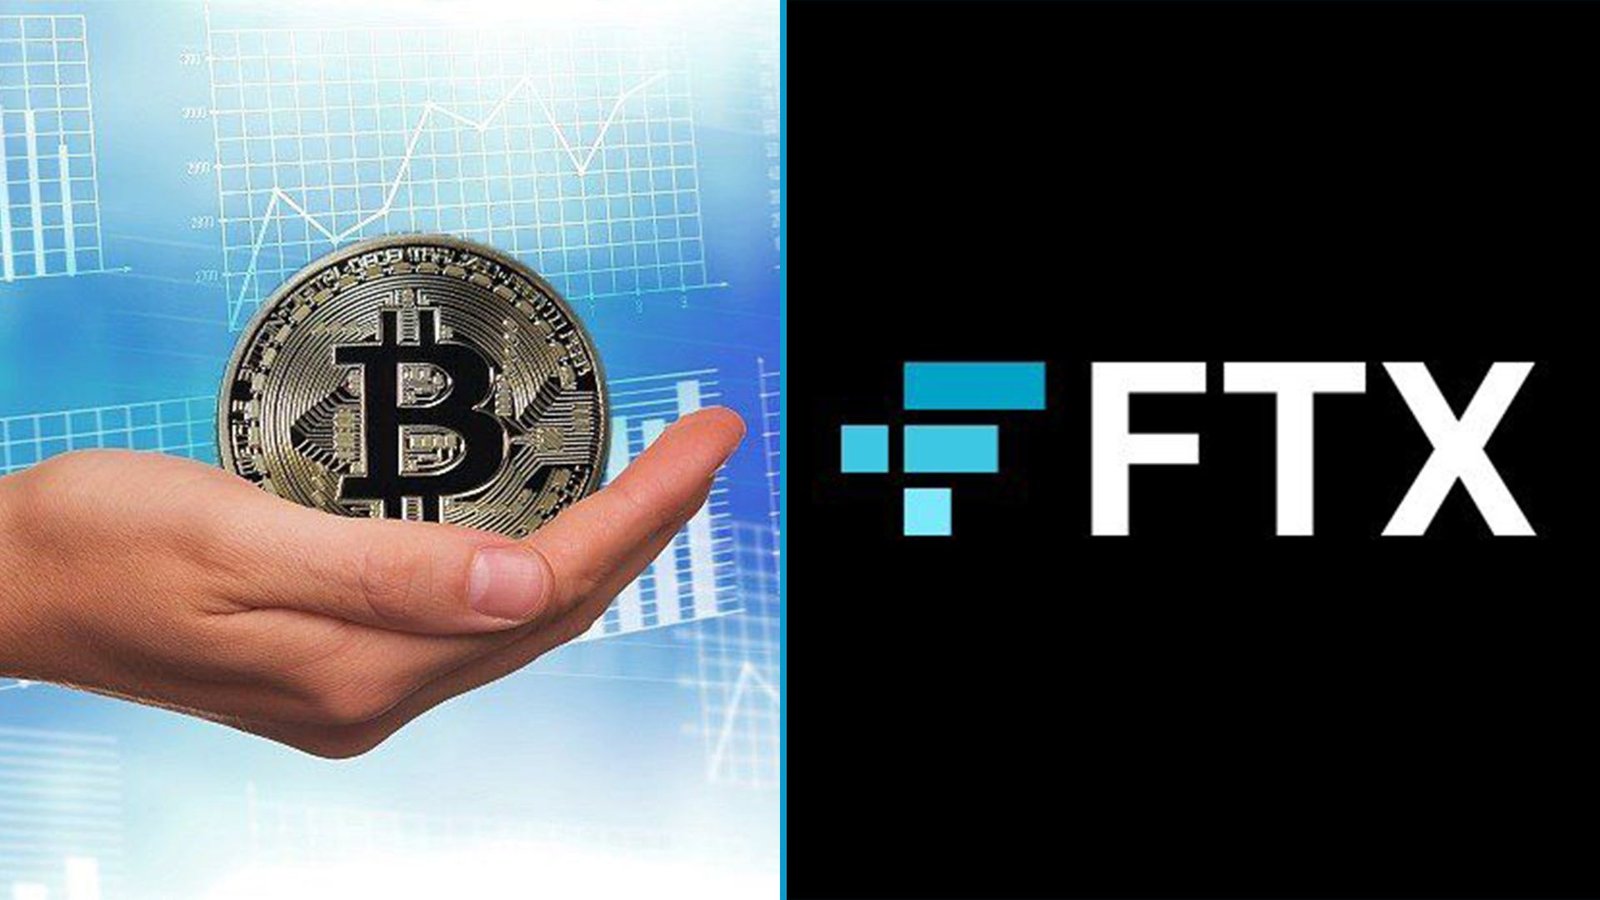 Recover funds from FTX